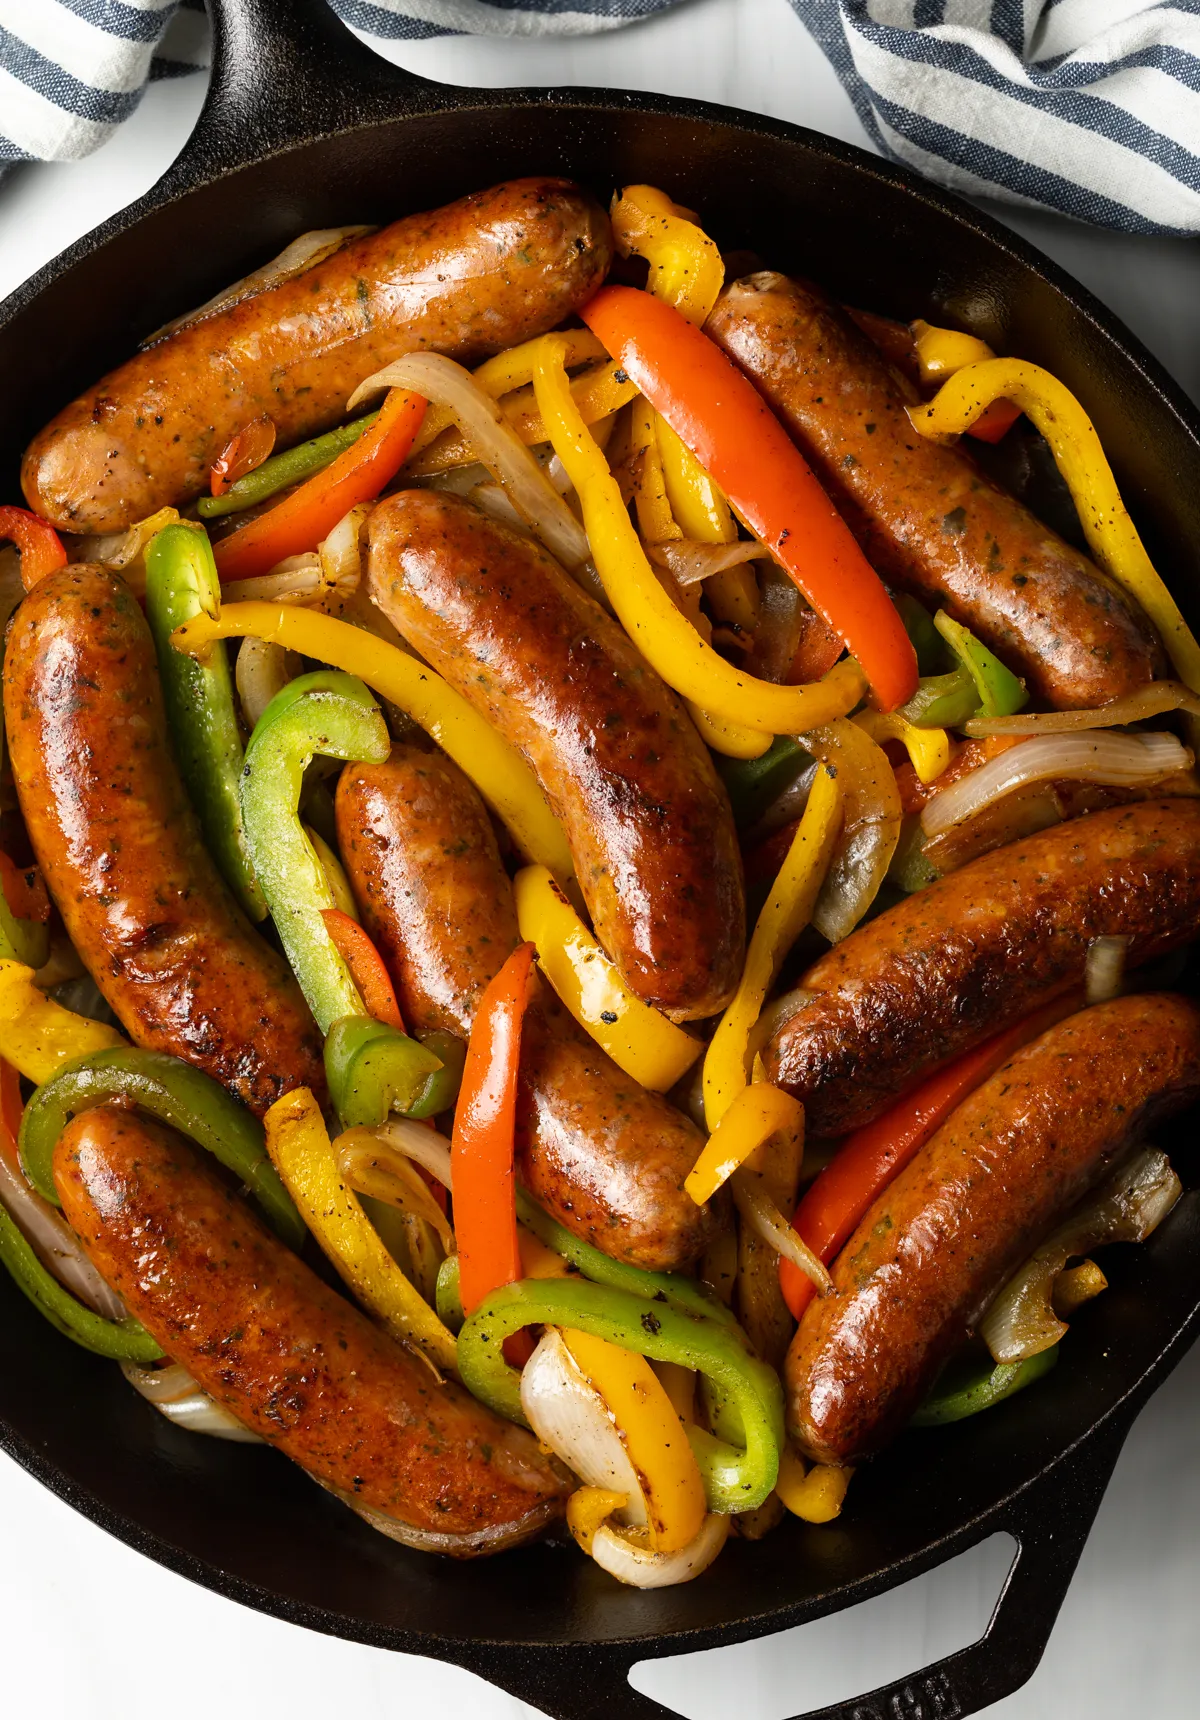 Sausage cooked with veggies in the oven